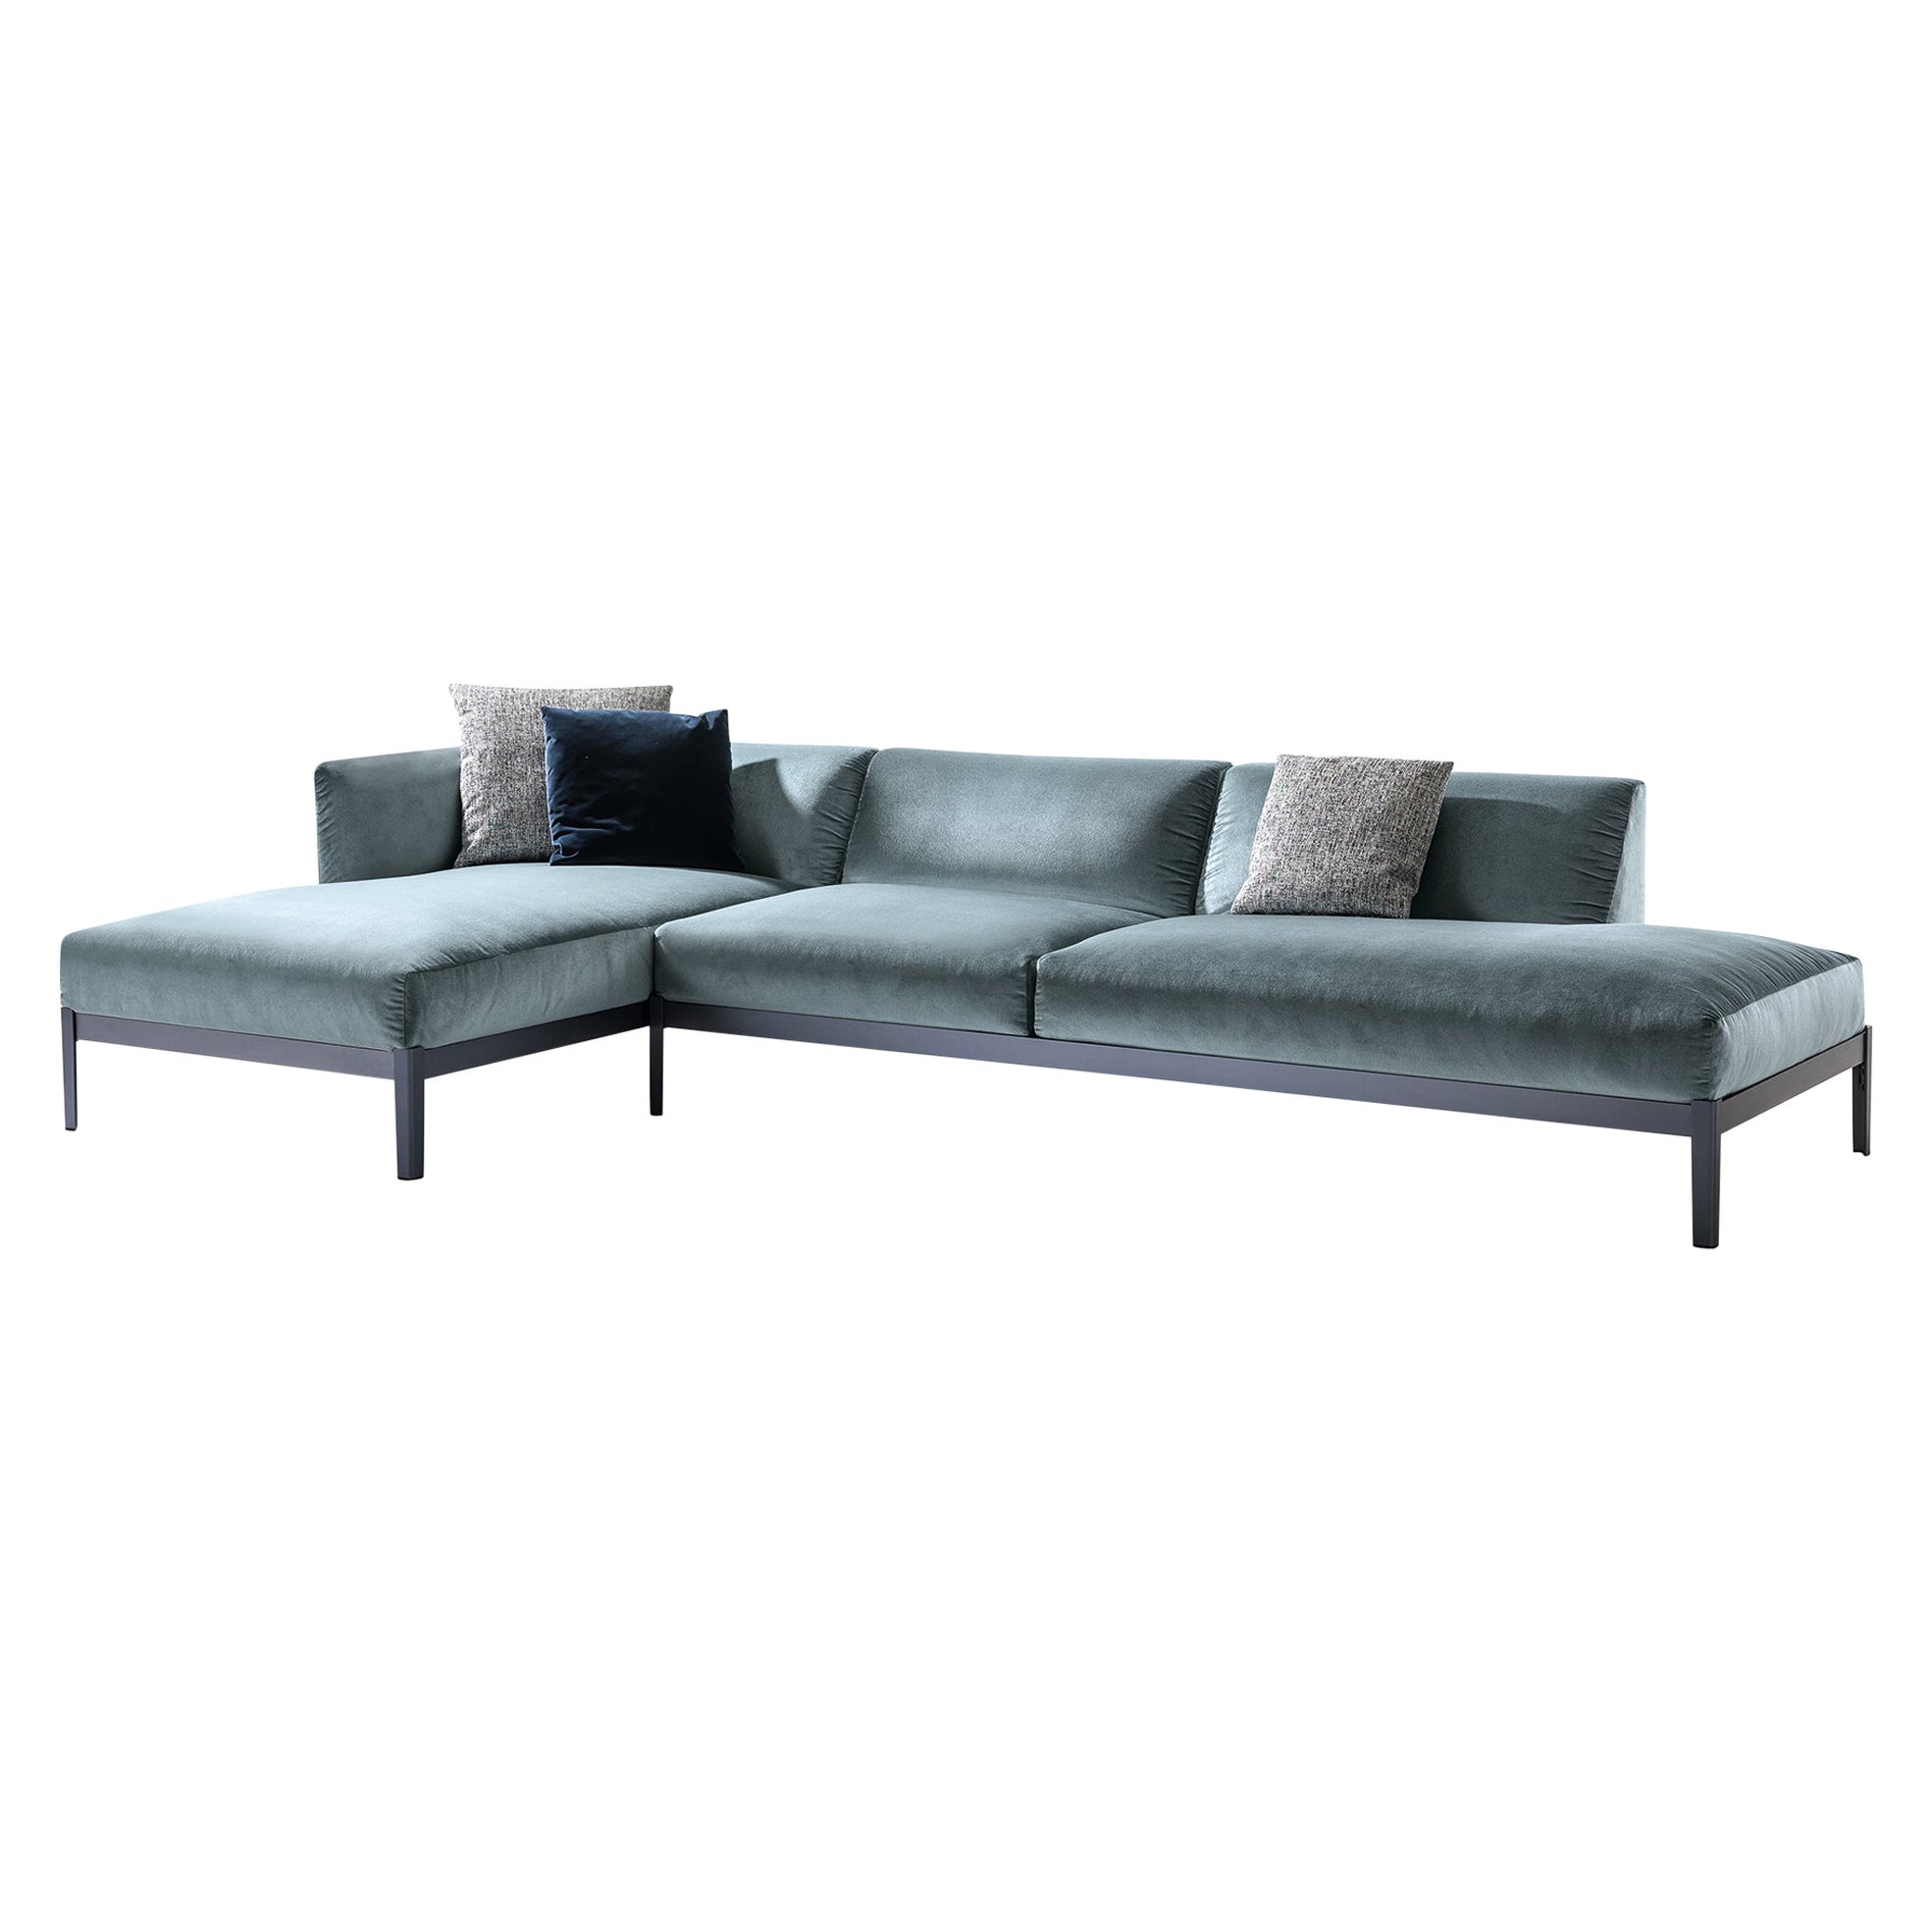 Ronan & Erwan Bourroullec 'Cotone' Sofa, Aluminum and Fabric by Cassina For Sale